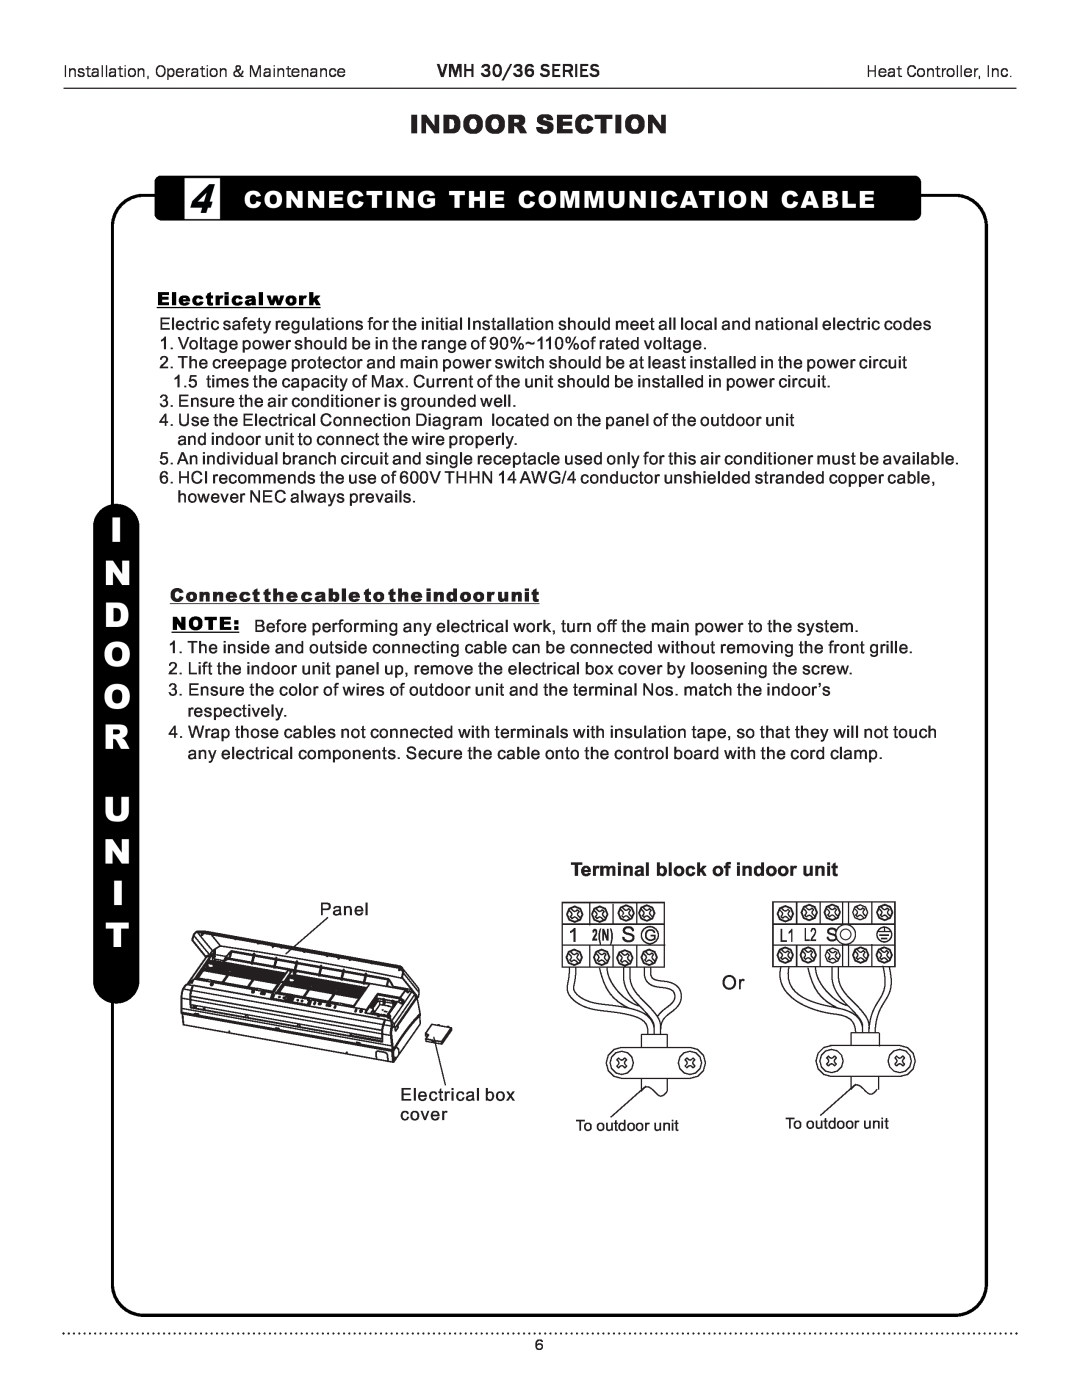 Heat Controller manual I N D O O R U N I T, 4CONNECTING THE COMMUNICATION CABLE, Indoor Section, VMH 30/36 SERIES 